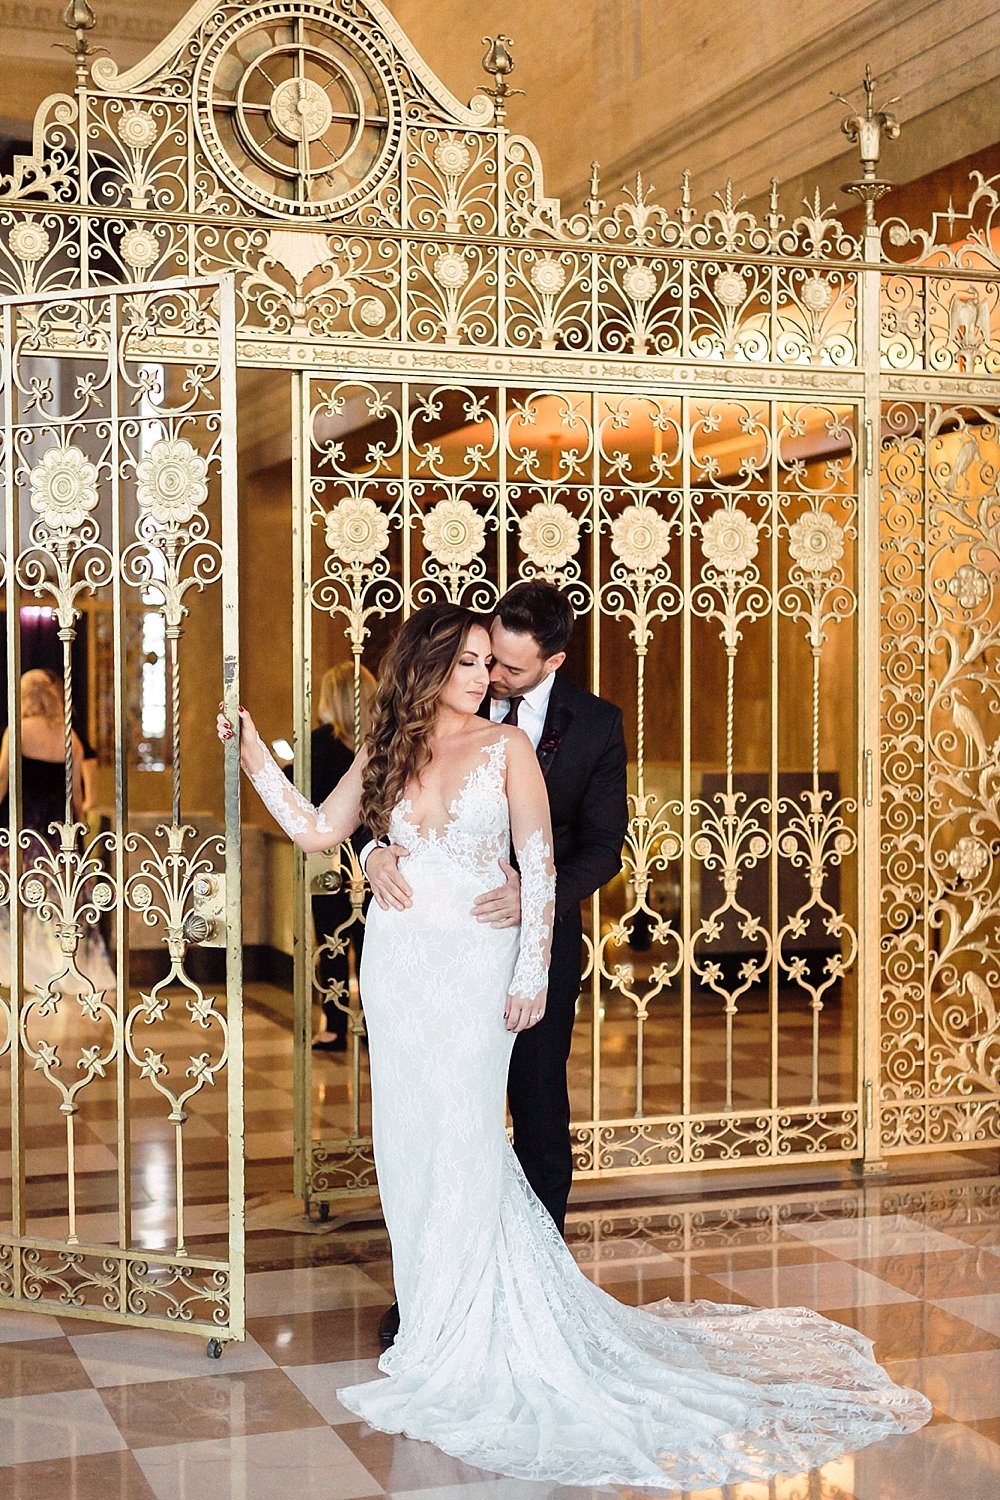 This moody and eclectic wedding at the historical DuPont Building in Miami, Florida is sure to make you swoon.